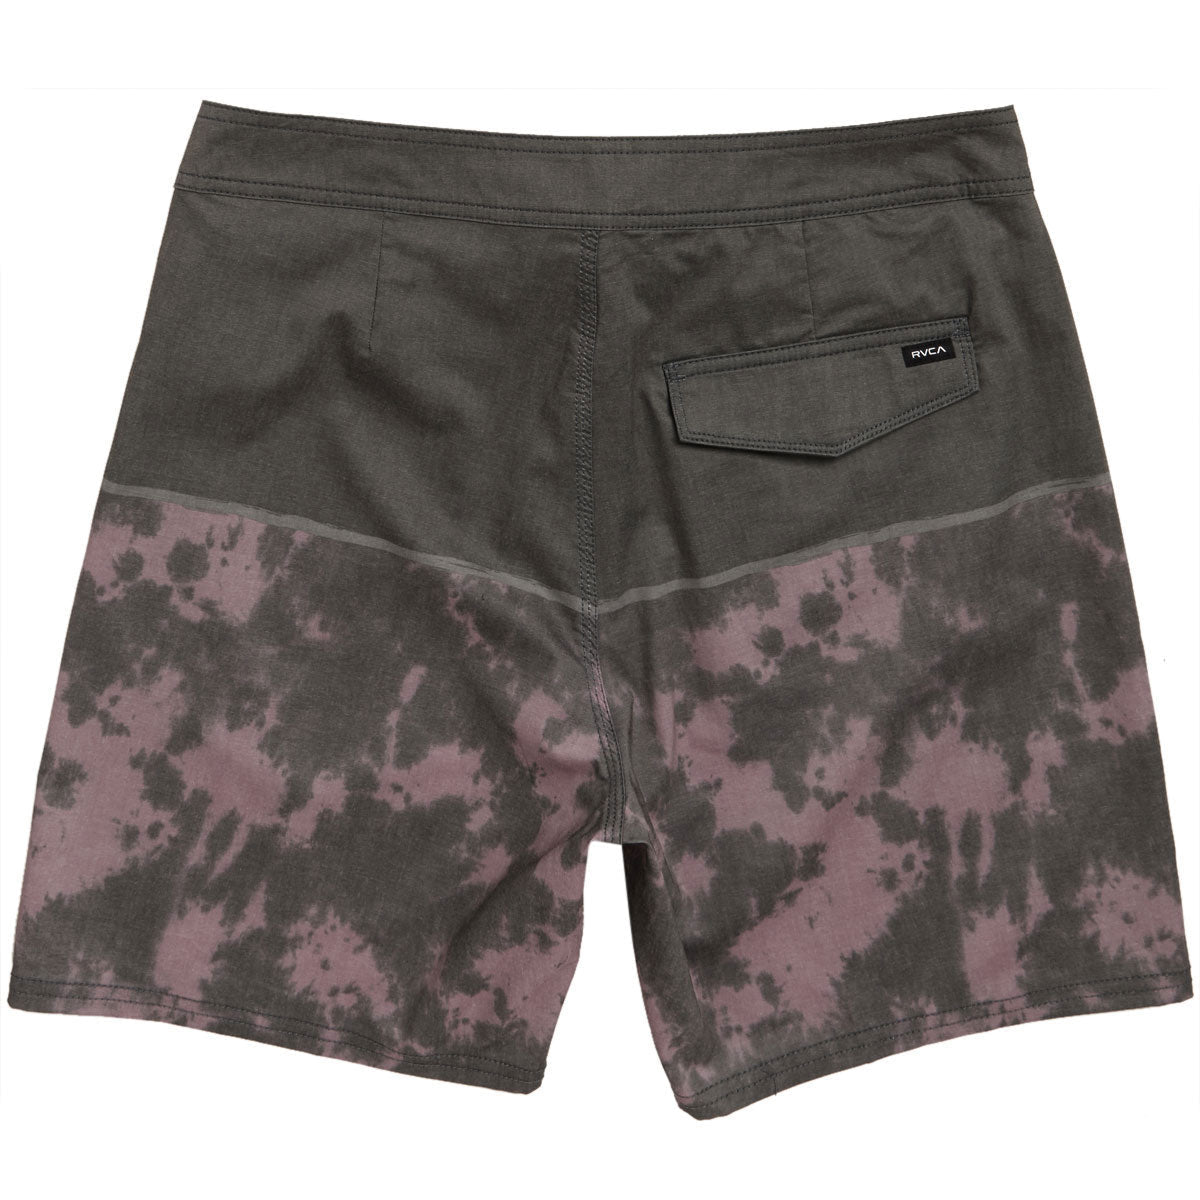 RVCA County Trunk Shorts - Lavender image 2